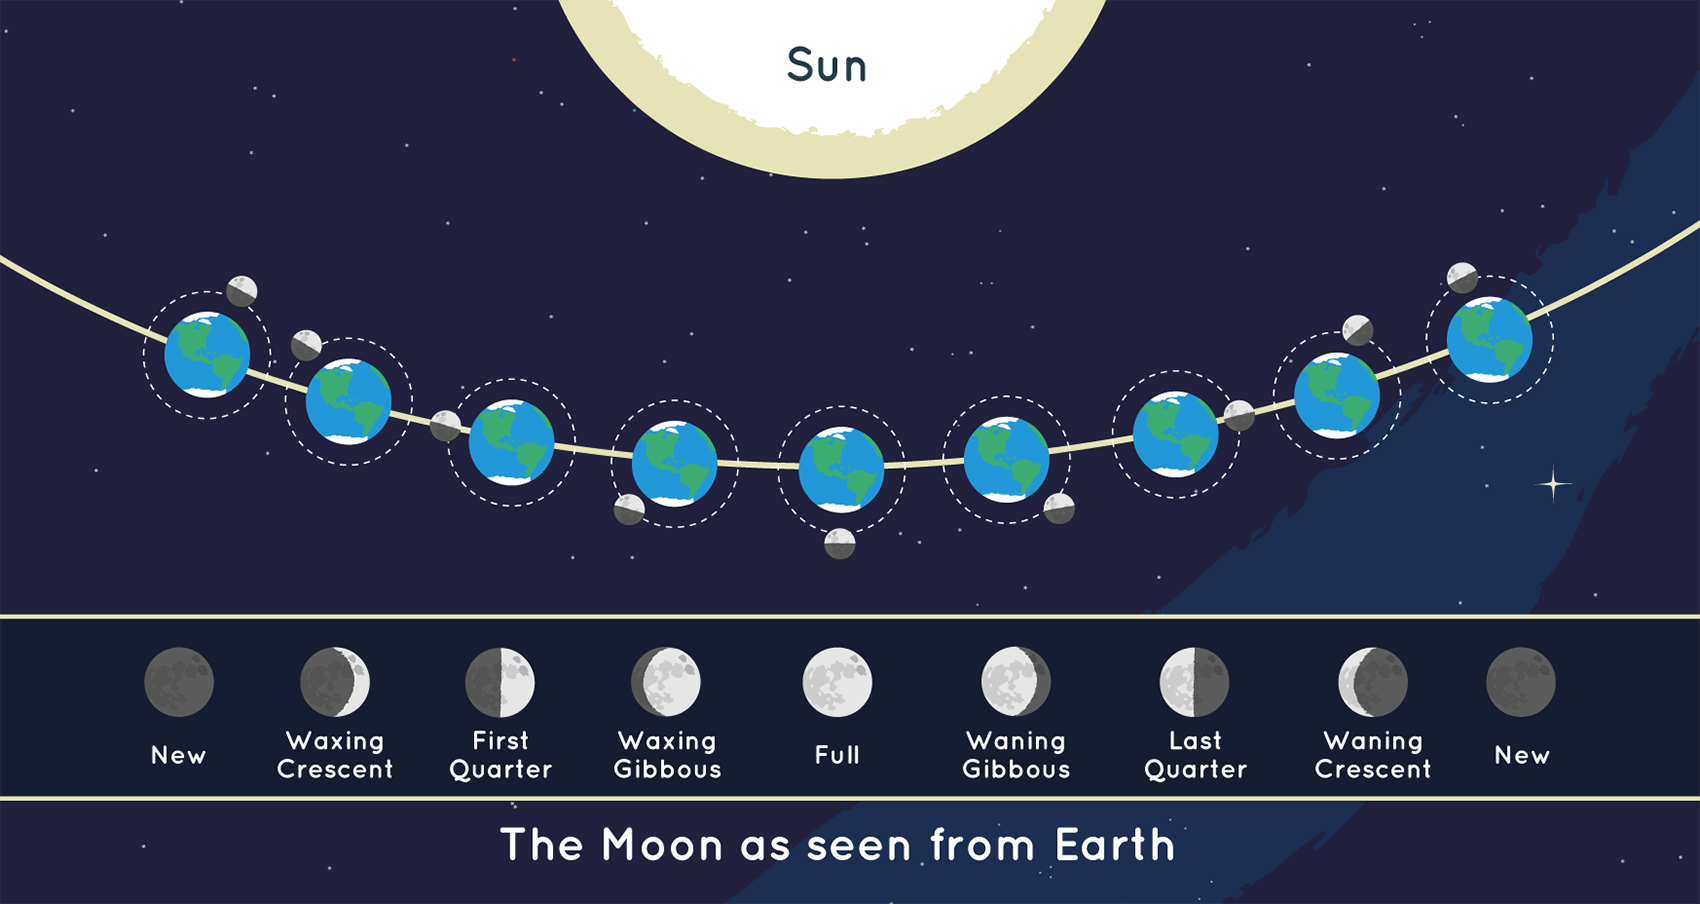 The position of the Moon and the Sun during Each of the Moon’s phases and the Moon as it appears from Earth during each phase.